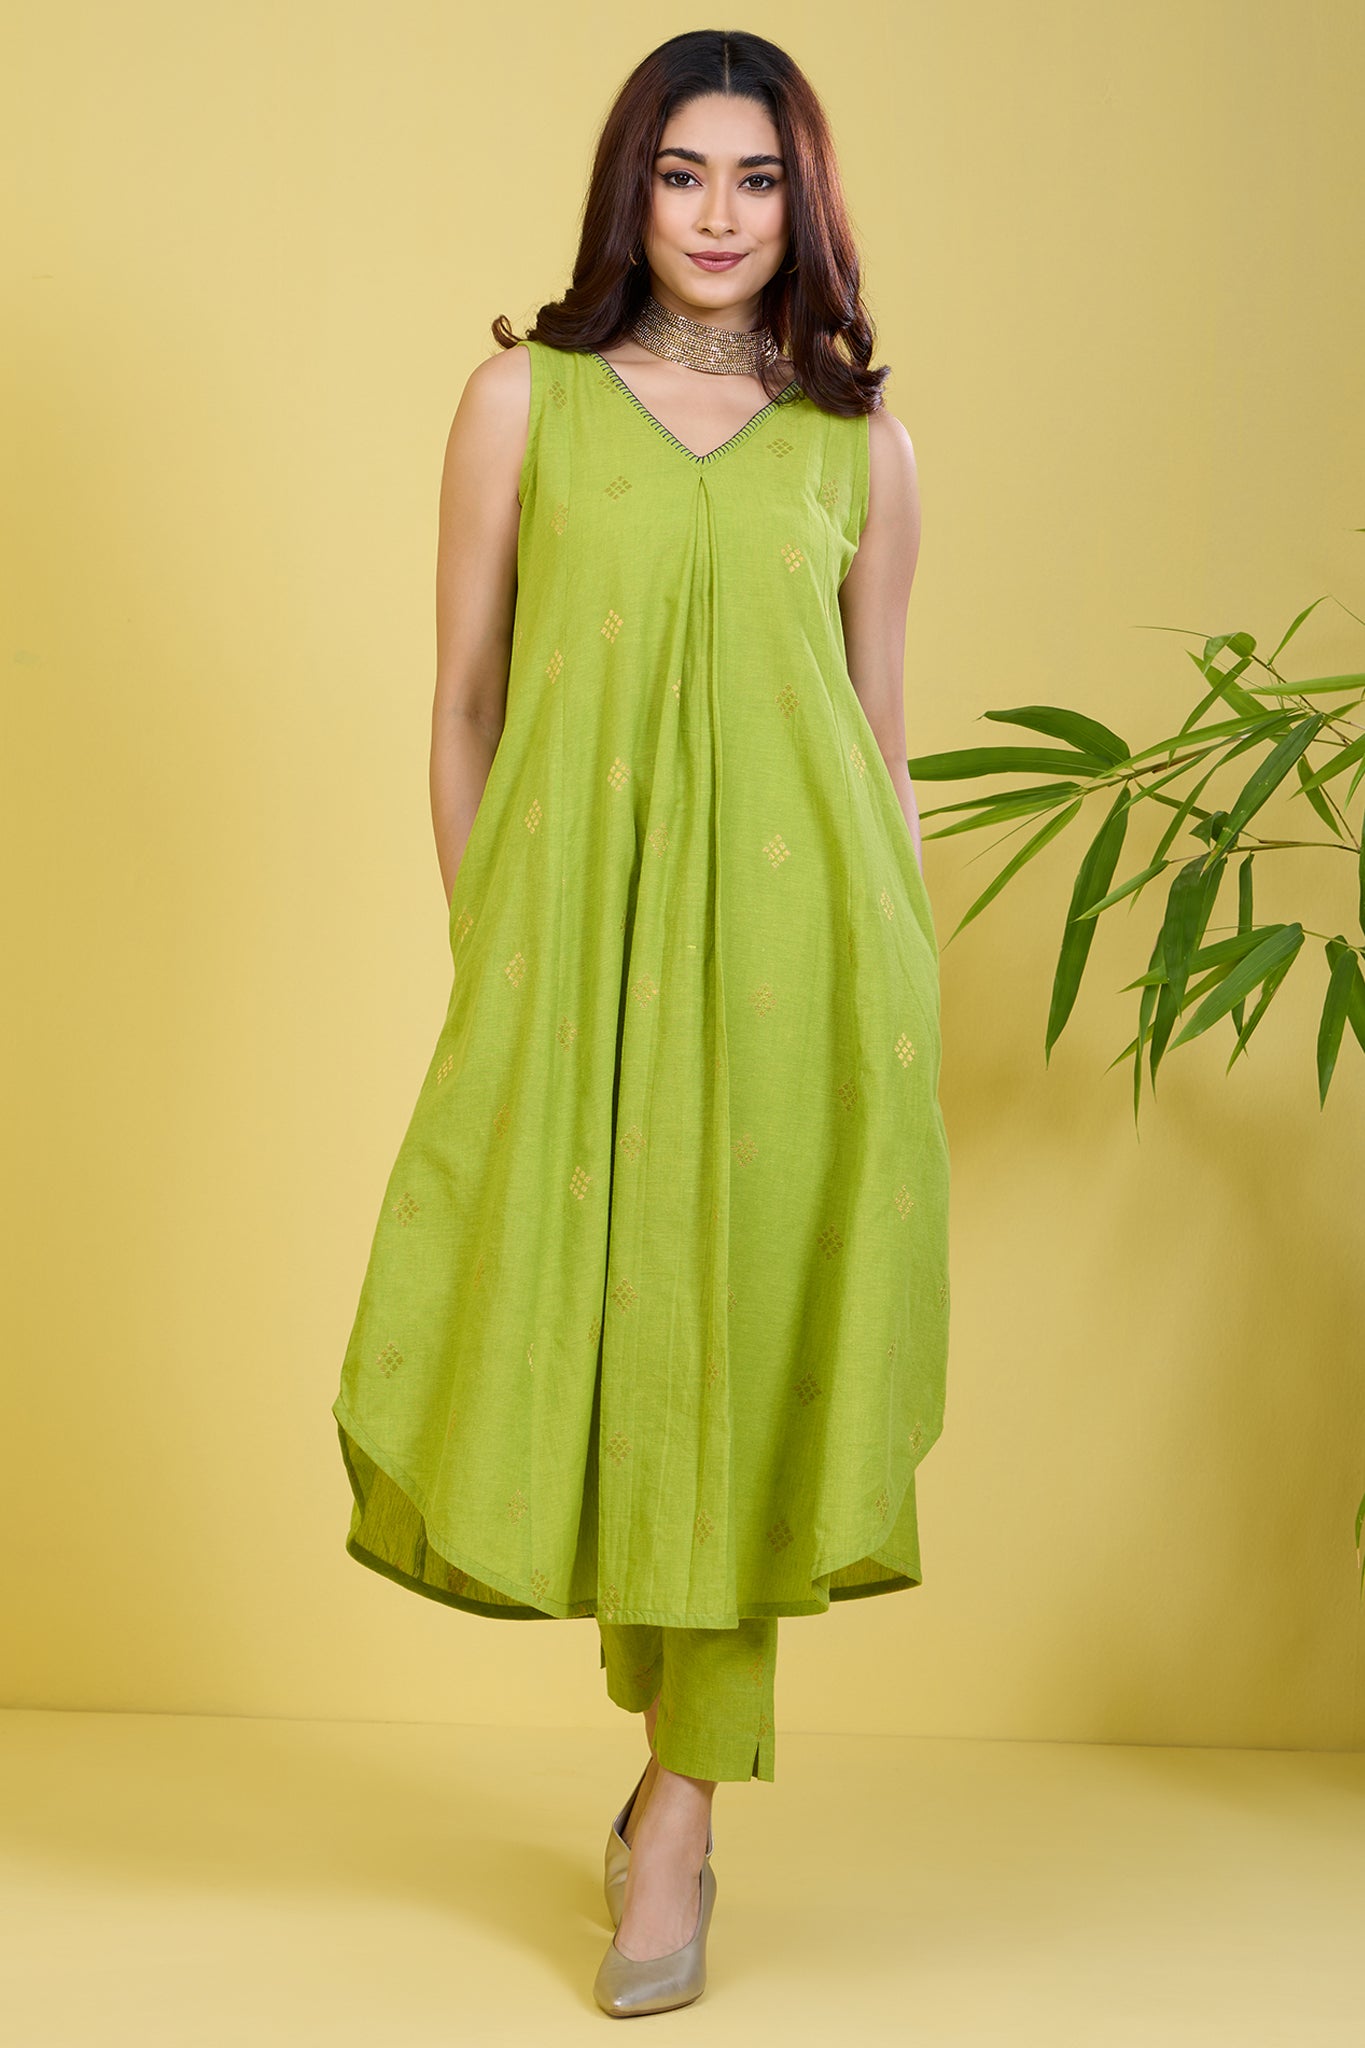 sleeveless lime green co-ord set with box pleat gilded citrus